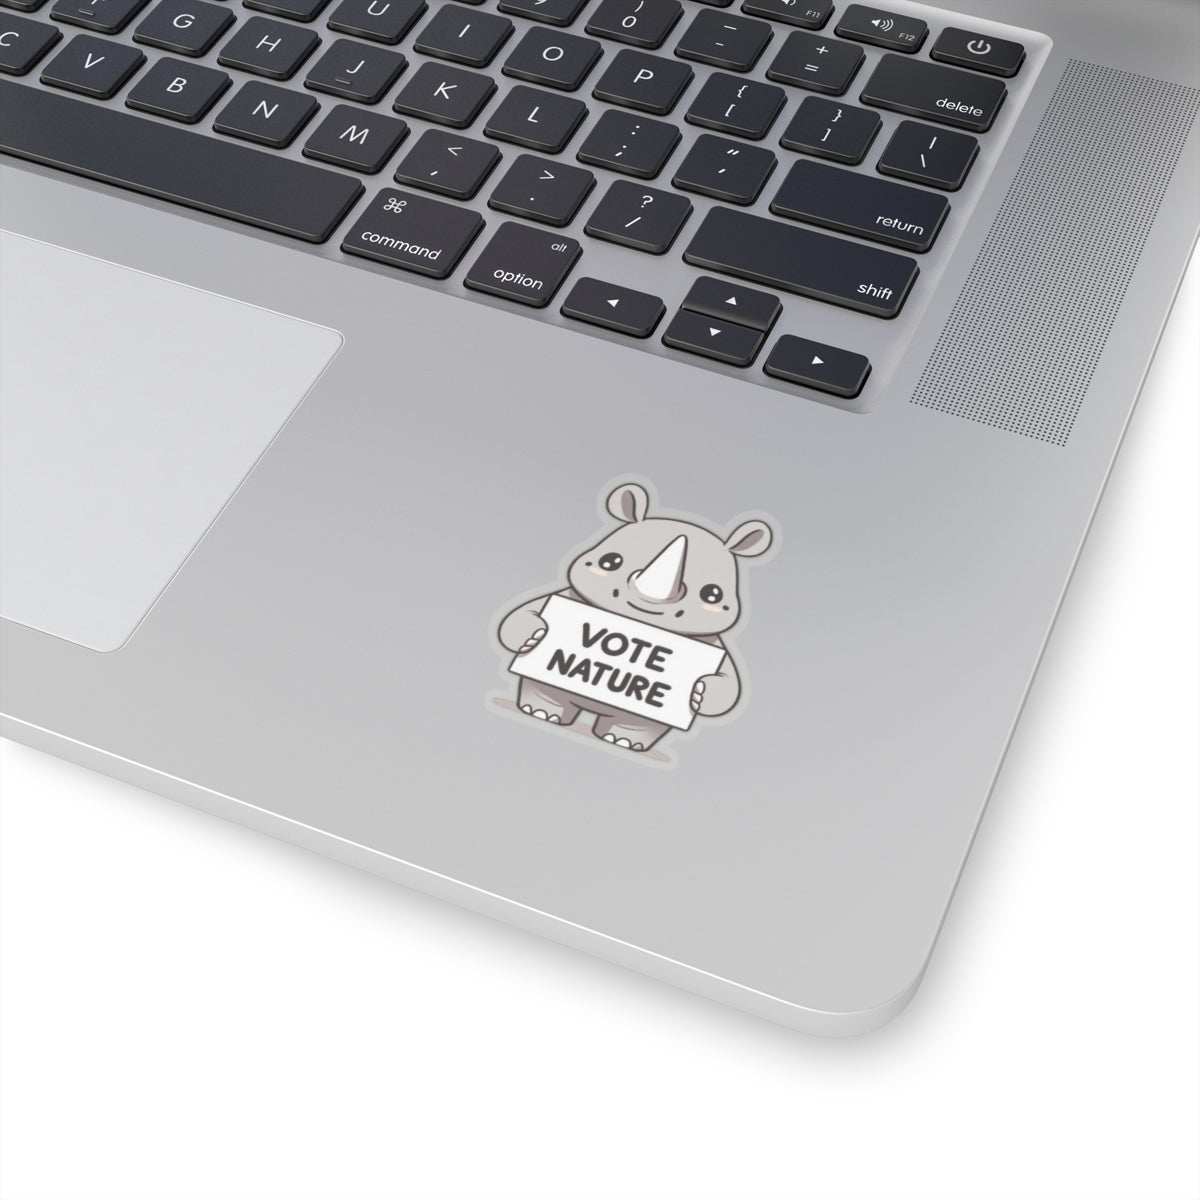 Inspirational Cute Rhino Statement vinyl Sticker: Vote Nature! for laptop, kindle, phone, ipad, instrument case, notebook, mood board